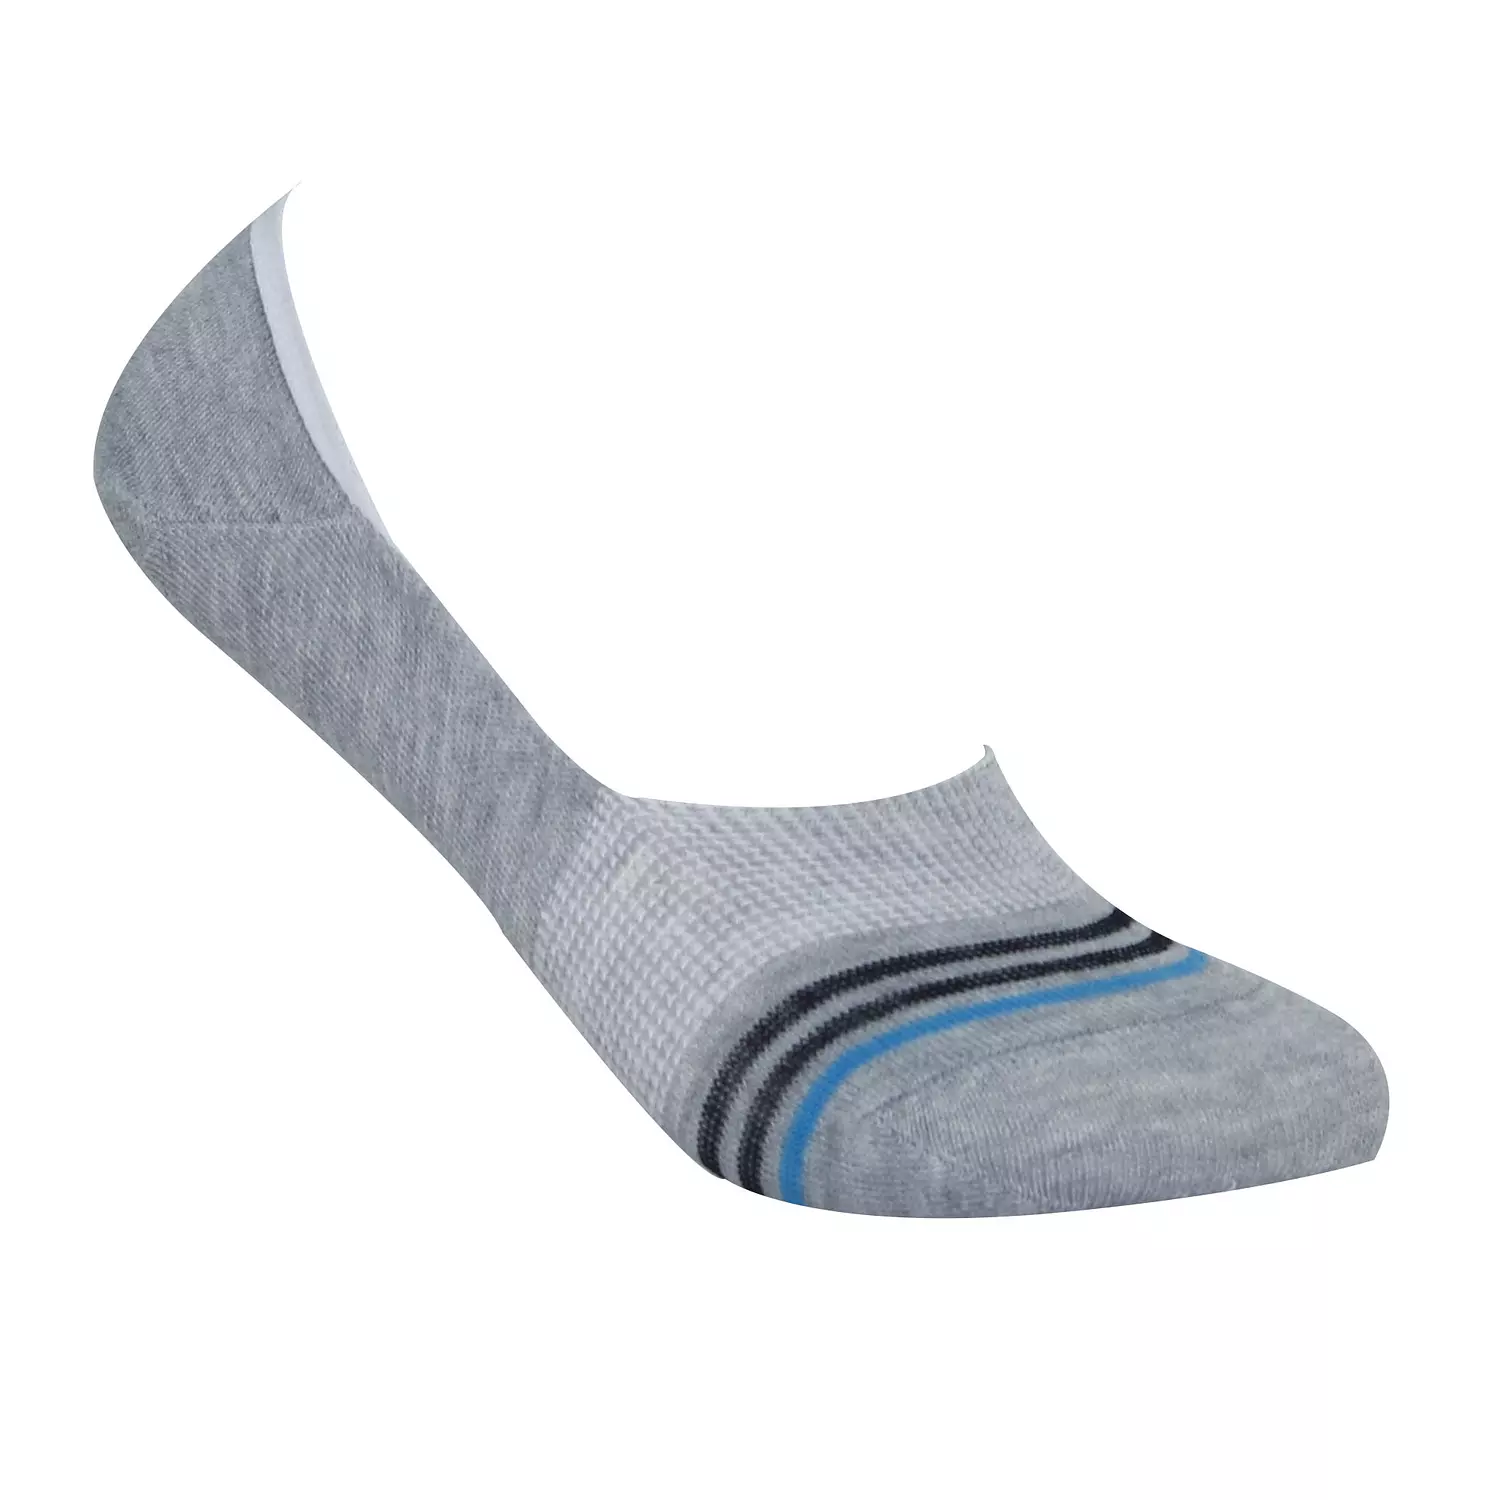 Vouche invisible Sock for women's 1